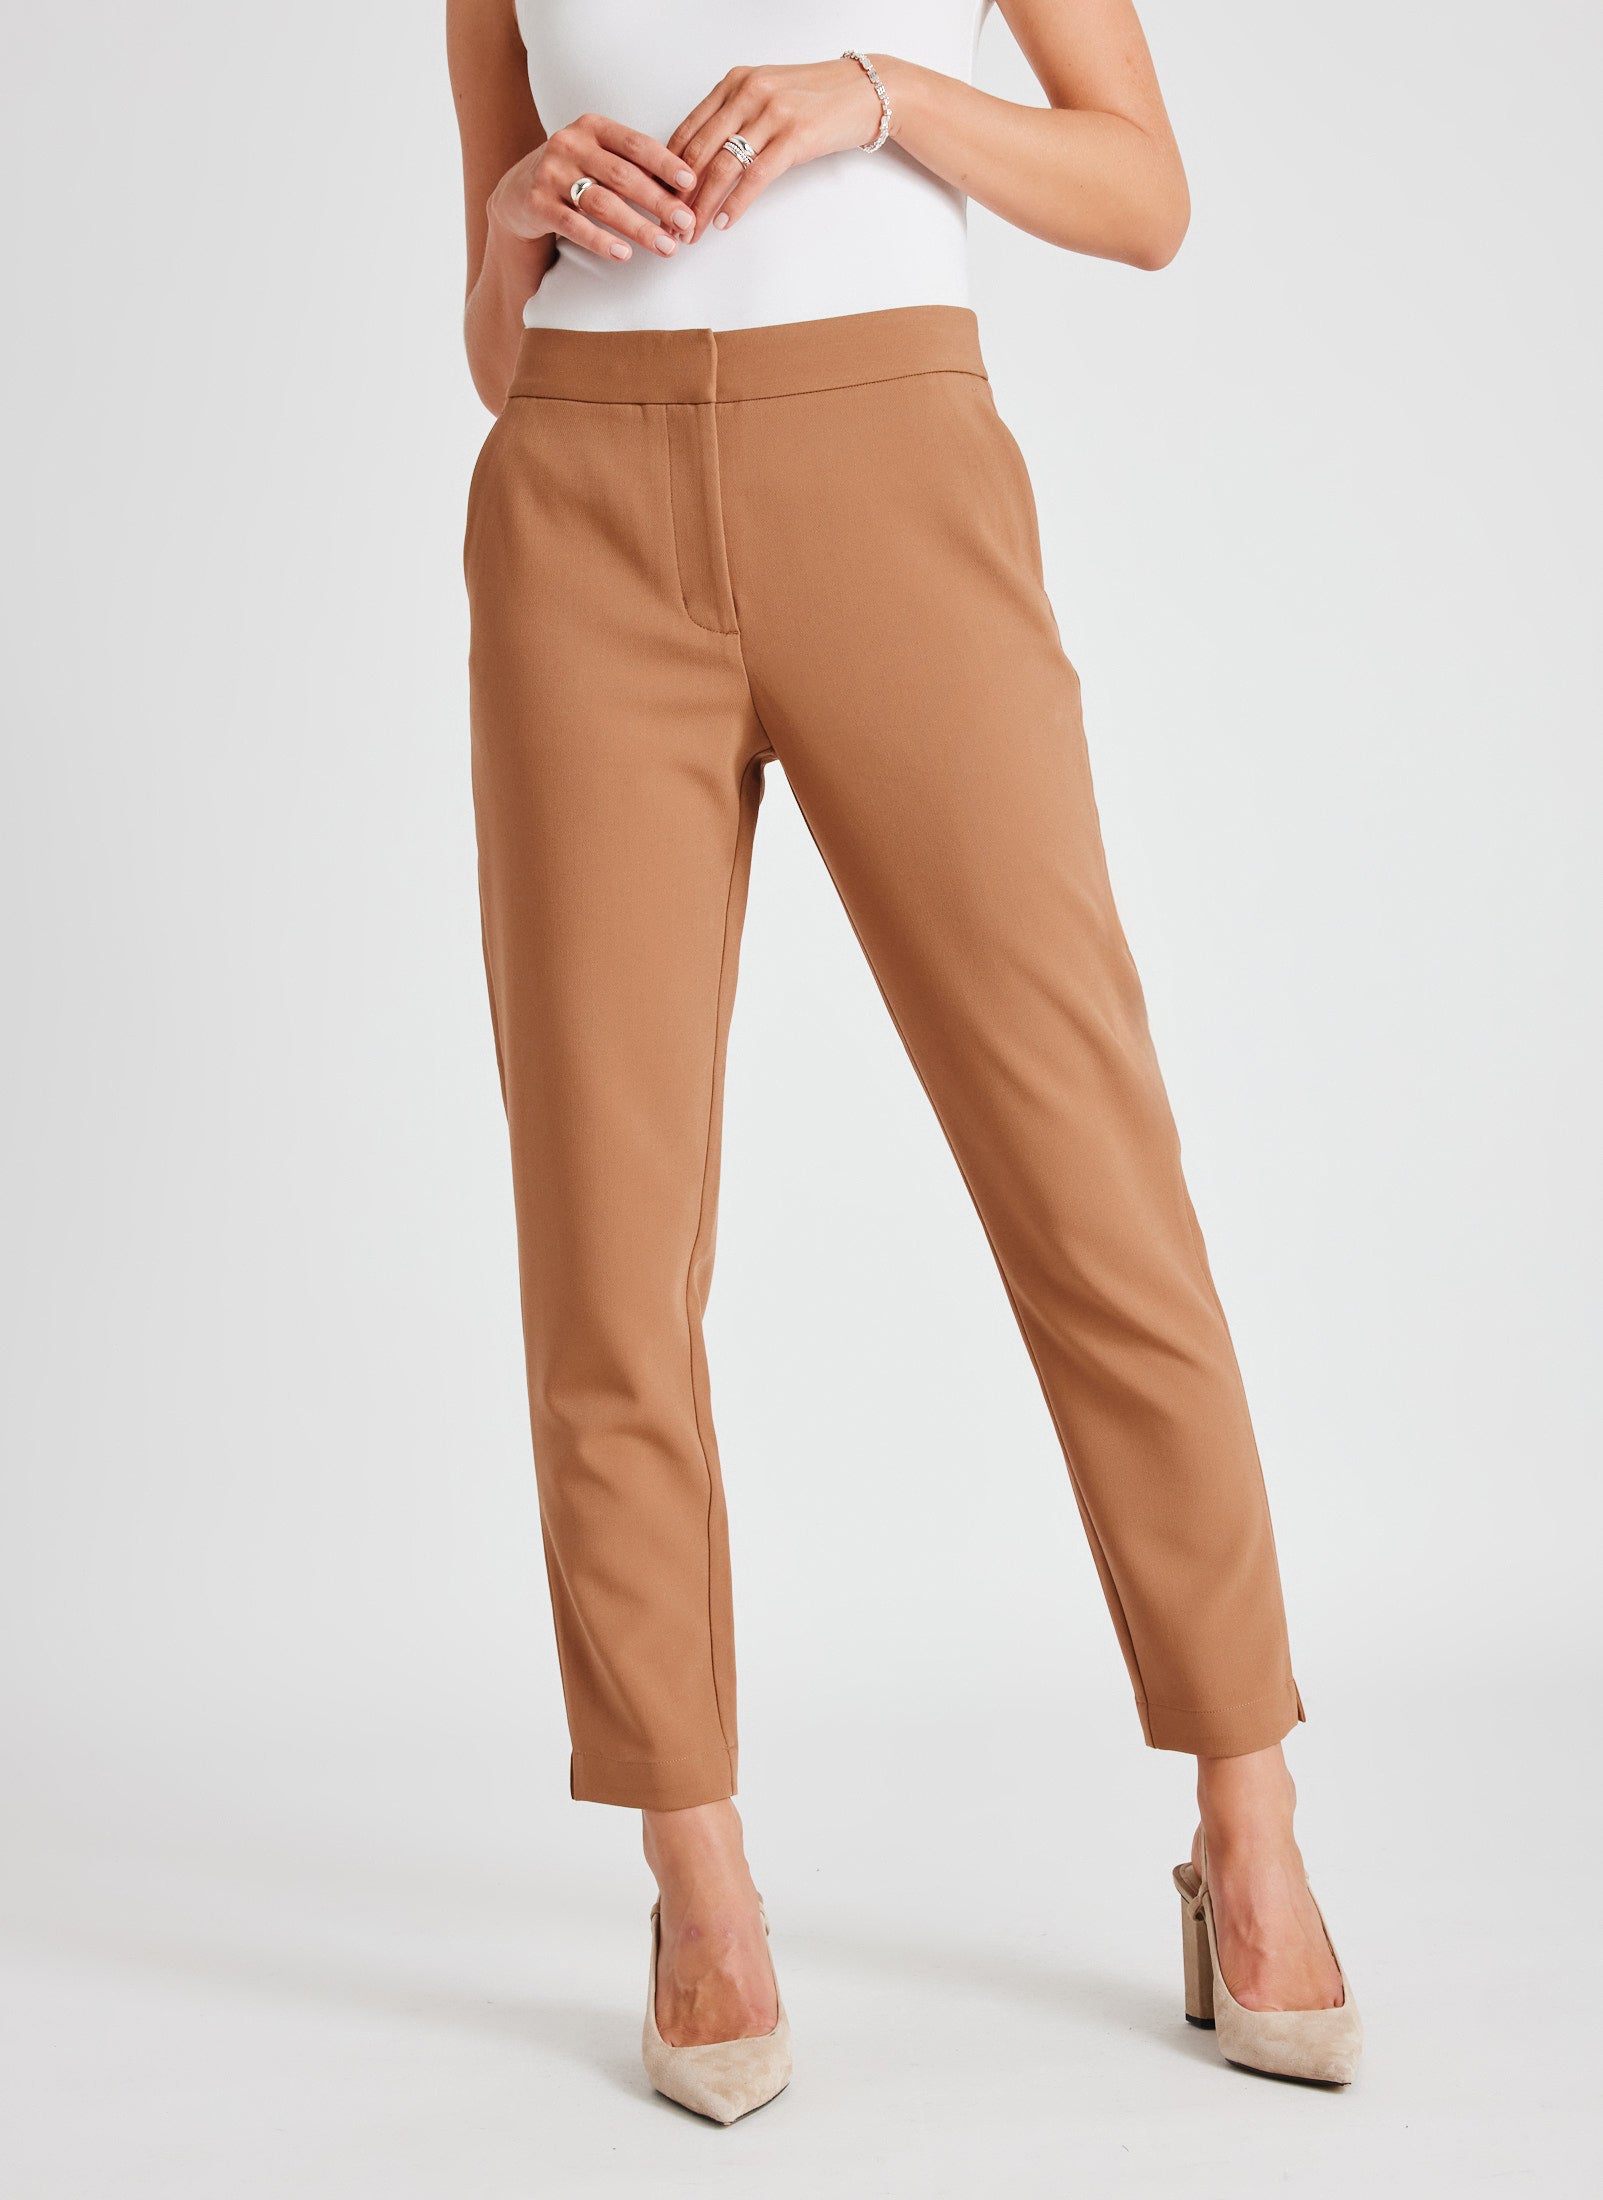 Kit and Ace — Adelaide Slim Pants